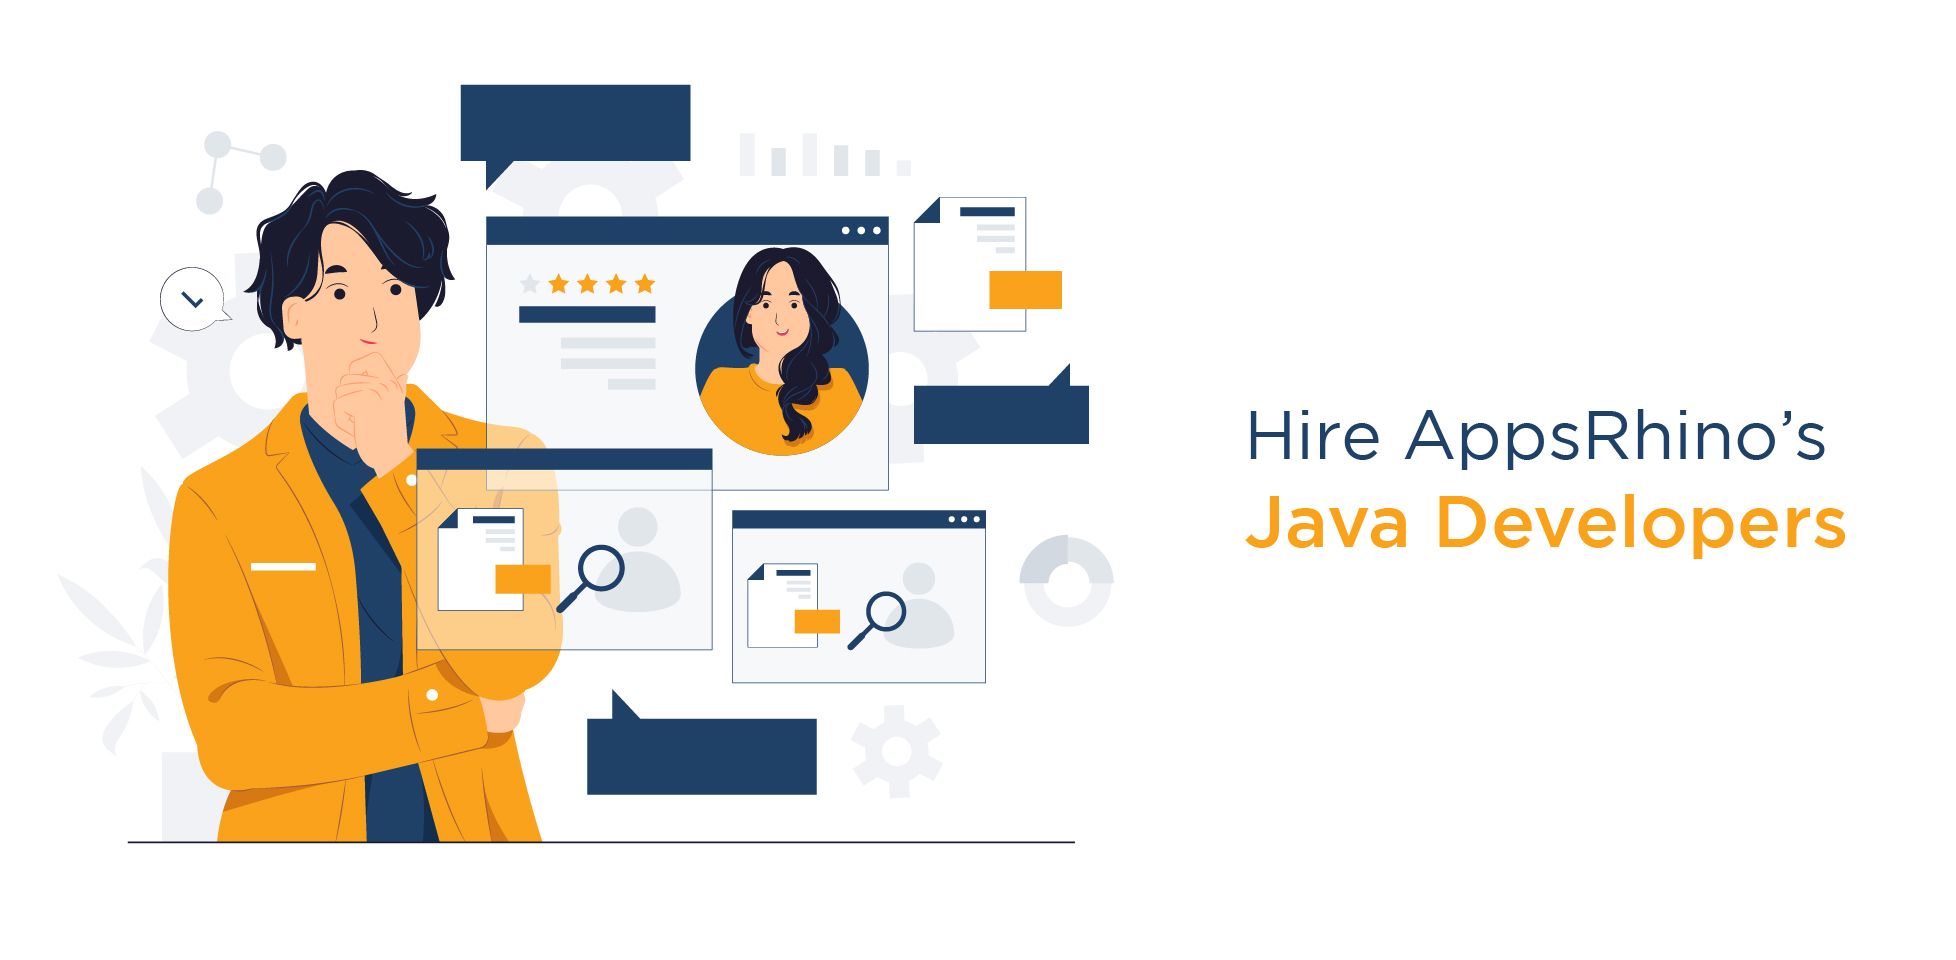 Why should you hire AppsRhino’s Java Developers